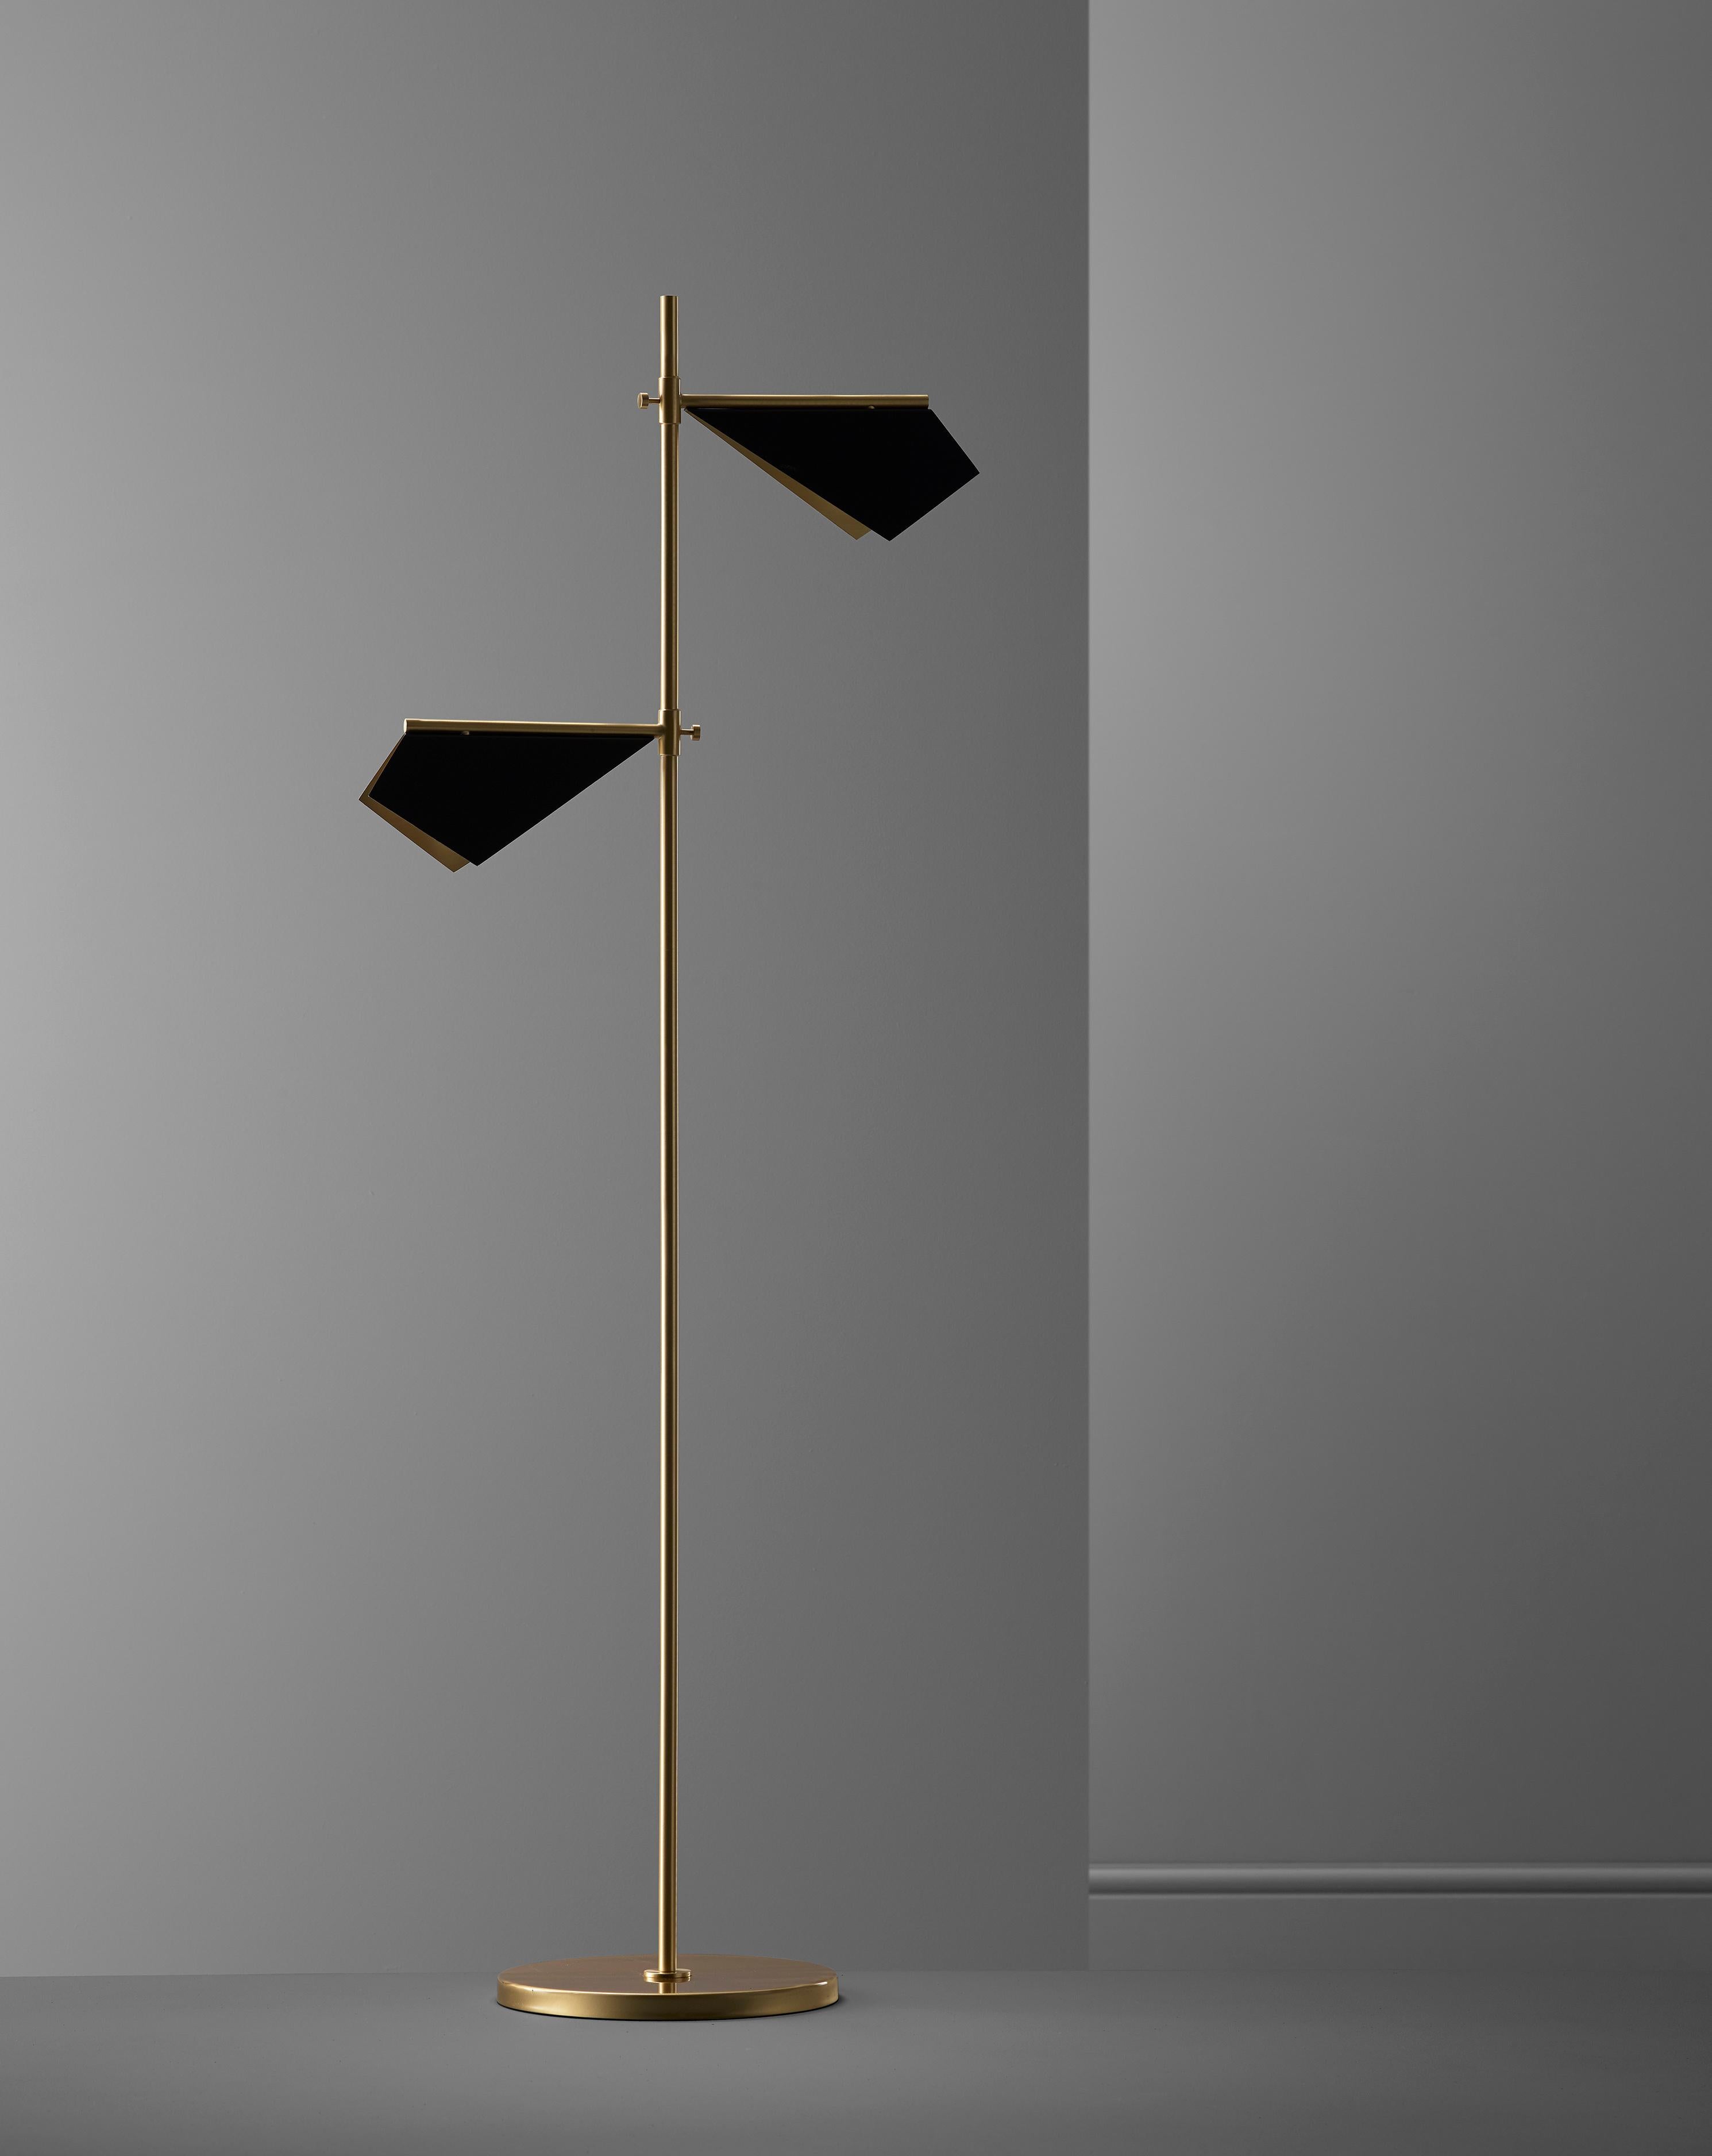 Inspired from observing bats while on vacation, this floor lamp combines a simple folded brass shade along with a long arm brass base and produced entirely from genuine brass. The topside of the shade finished in matt black and the underside in